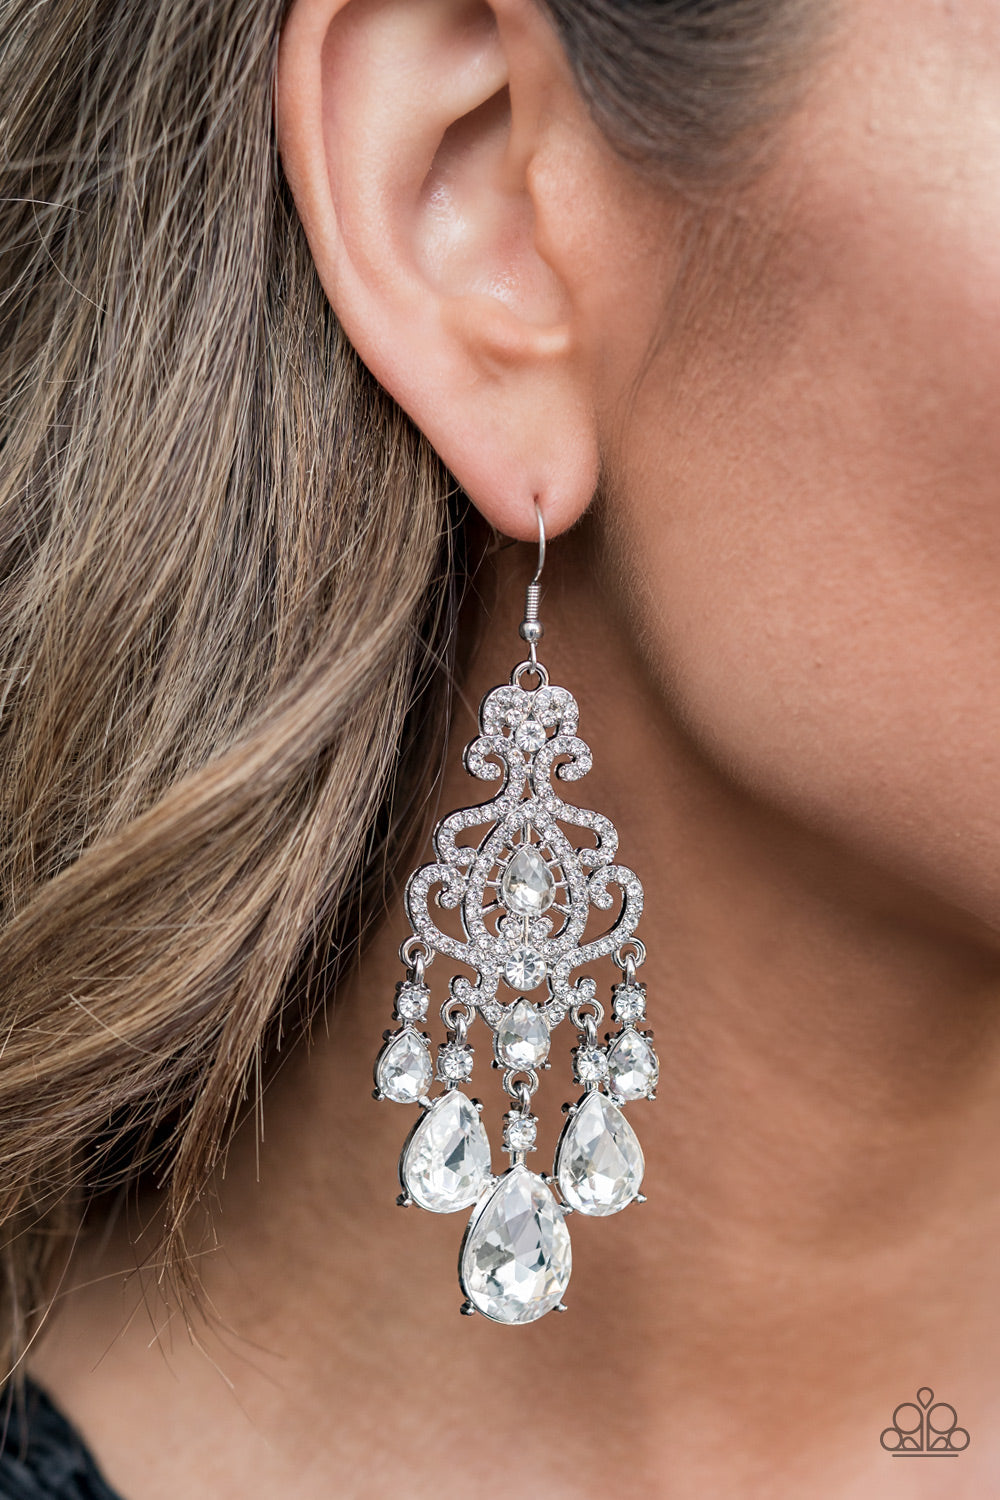 Queen Of All Things Sparkly - White and Silver Earrings - Paparazzi Accessories - Gradually increasing in size, glassy white teardrop gems create a dramatic fringe at the bottom of a decorative silver frame swirling with dainty white rhinestones for a timelessly over-the-top sparkle. Earring attaches to a standard fishhook fitting. 